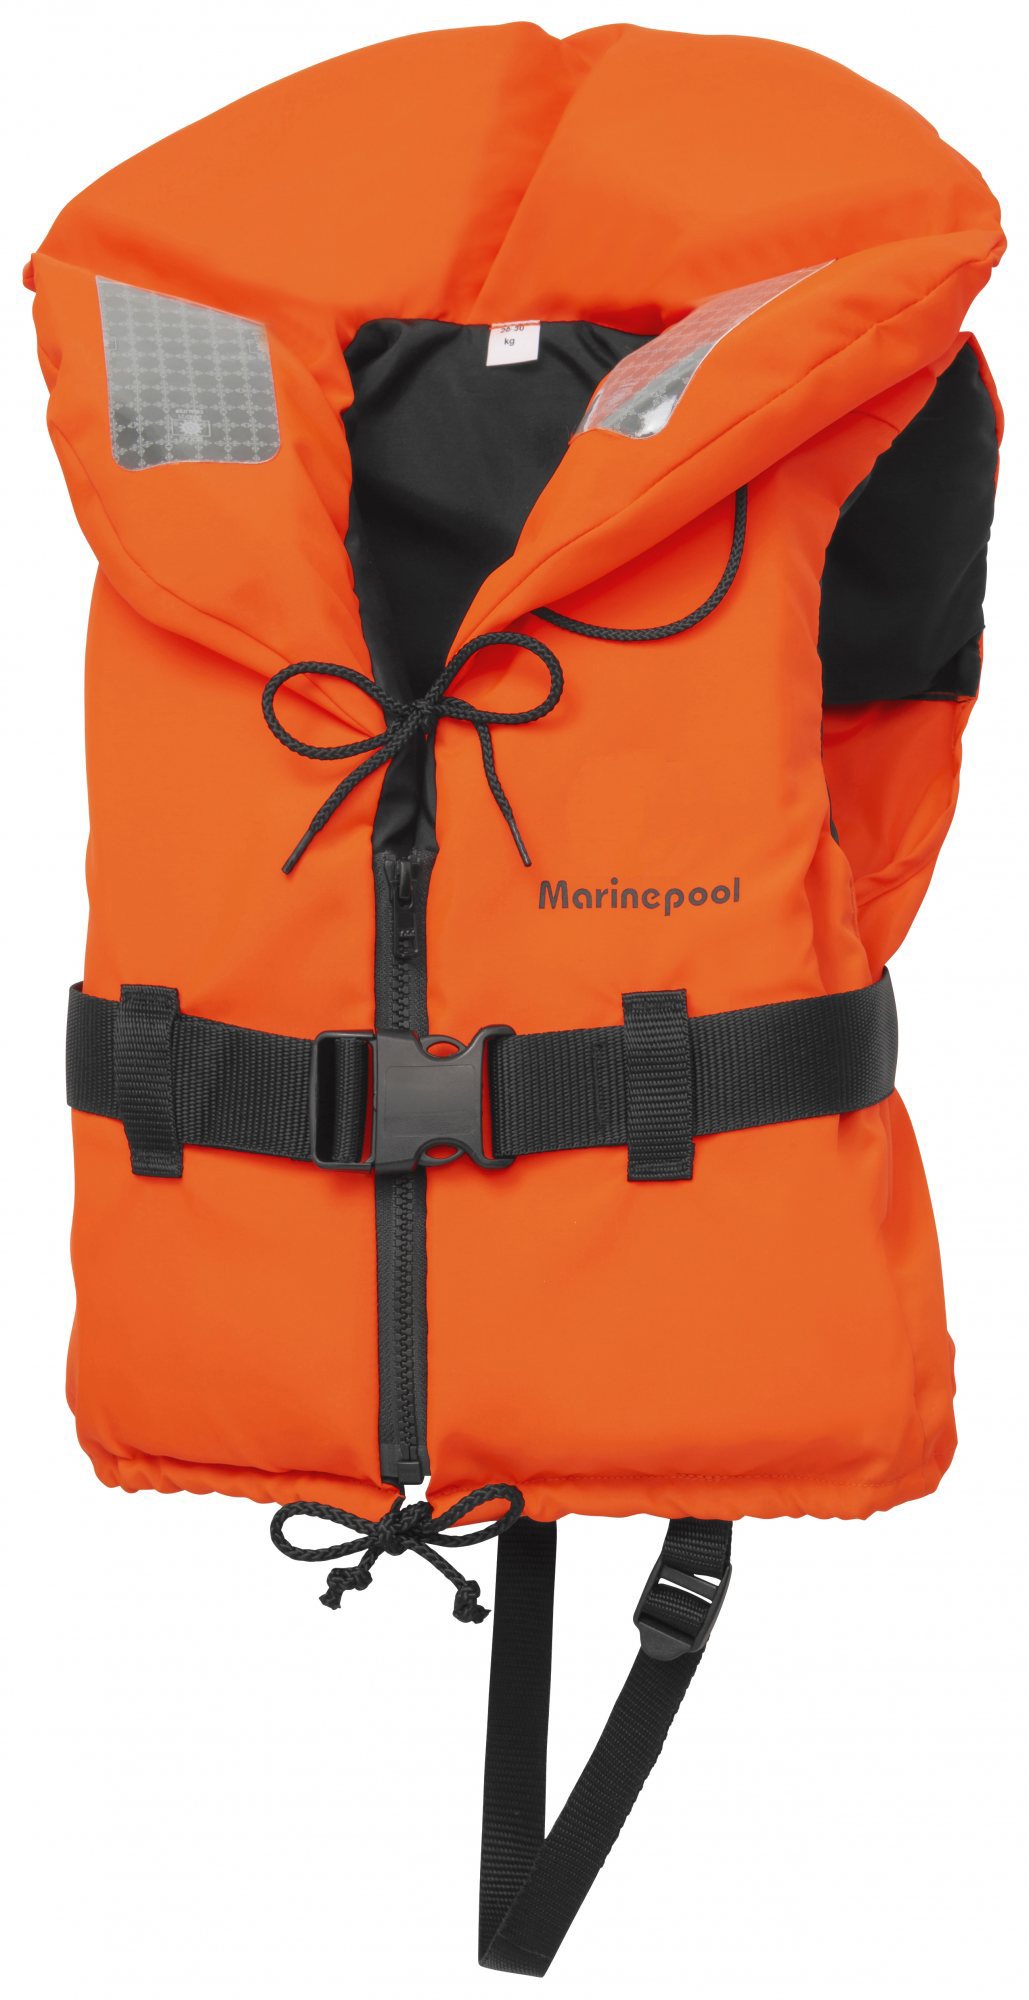 https://www.lifejackets.co.uk/images/products/large/824_673.jpg